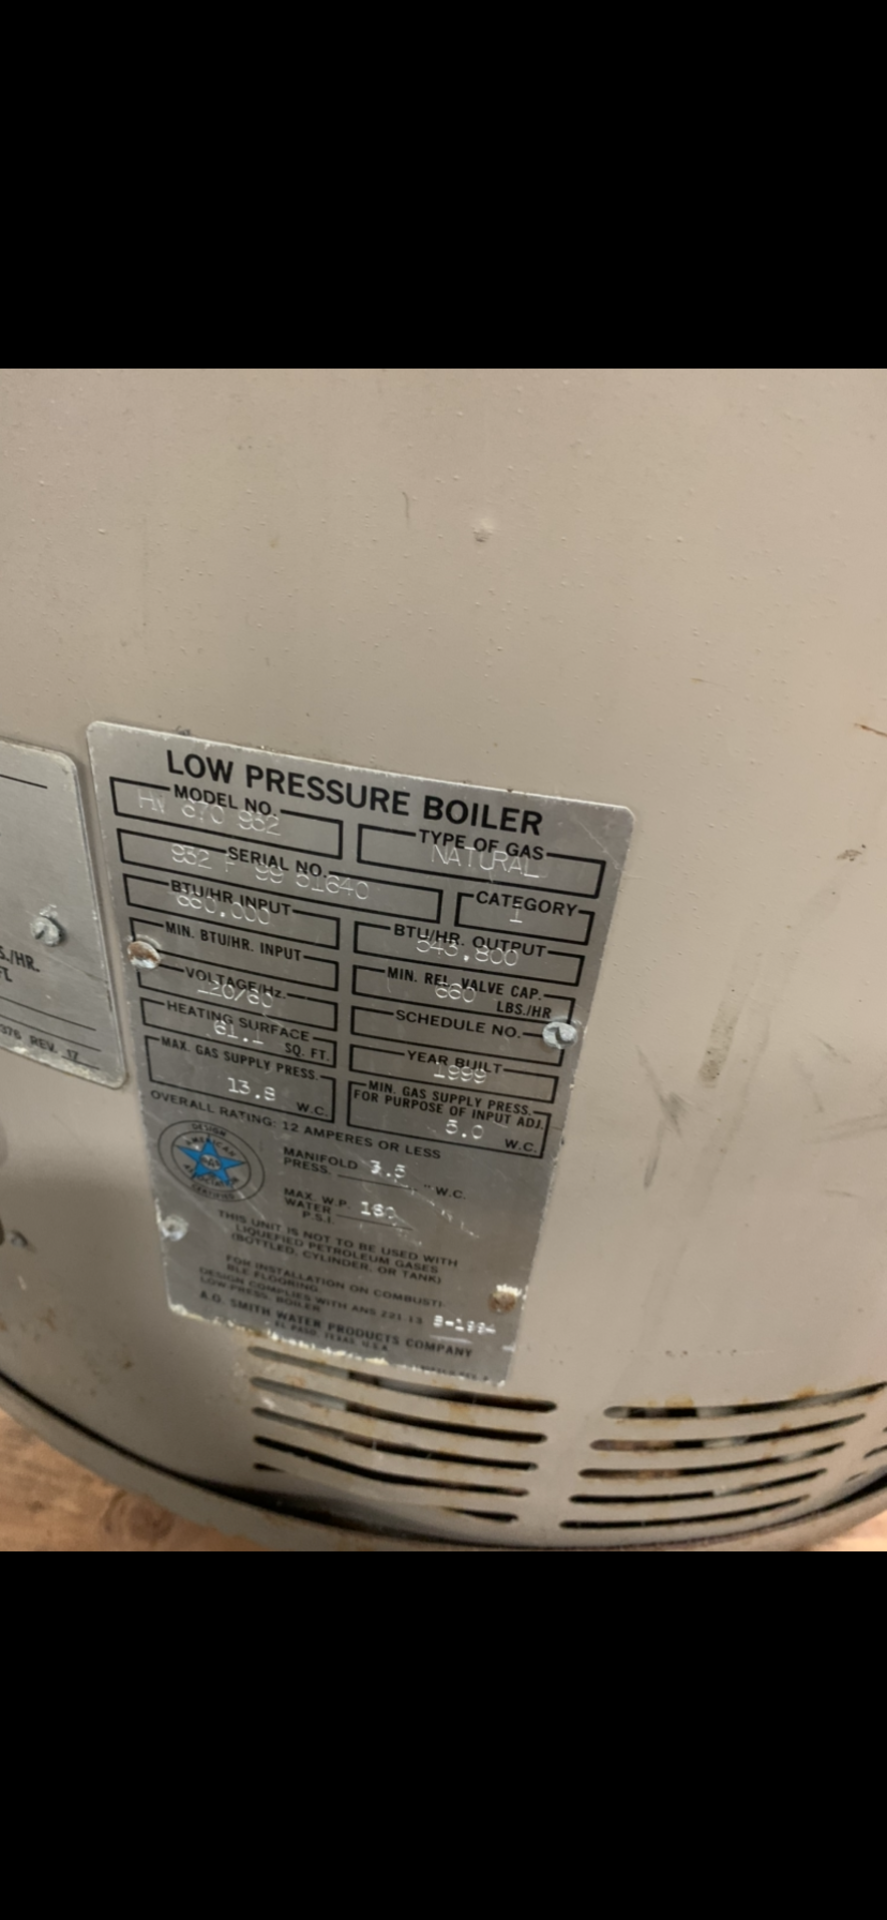 A.O. SMITH LOW PRESSURE BOILER MODEL-FW670-932 S#932-F-99-5162 - Image 2 of 2